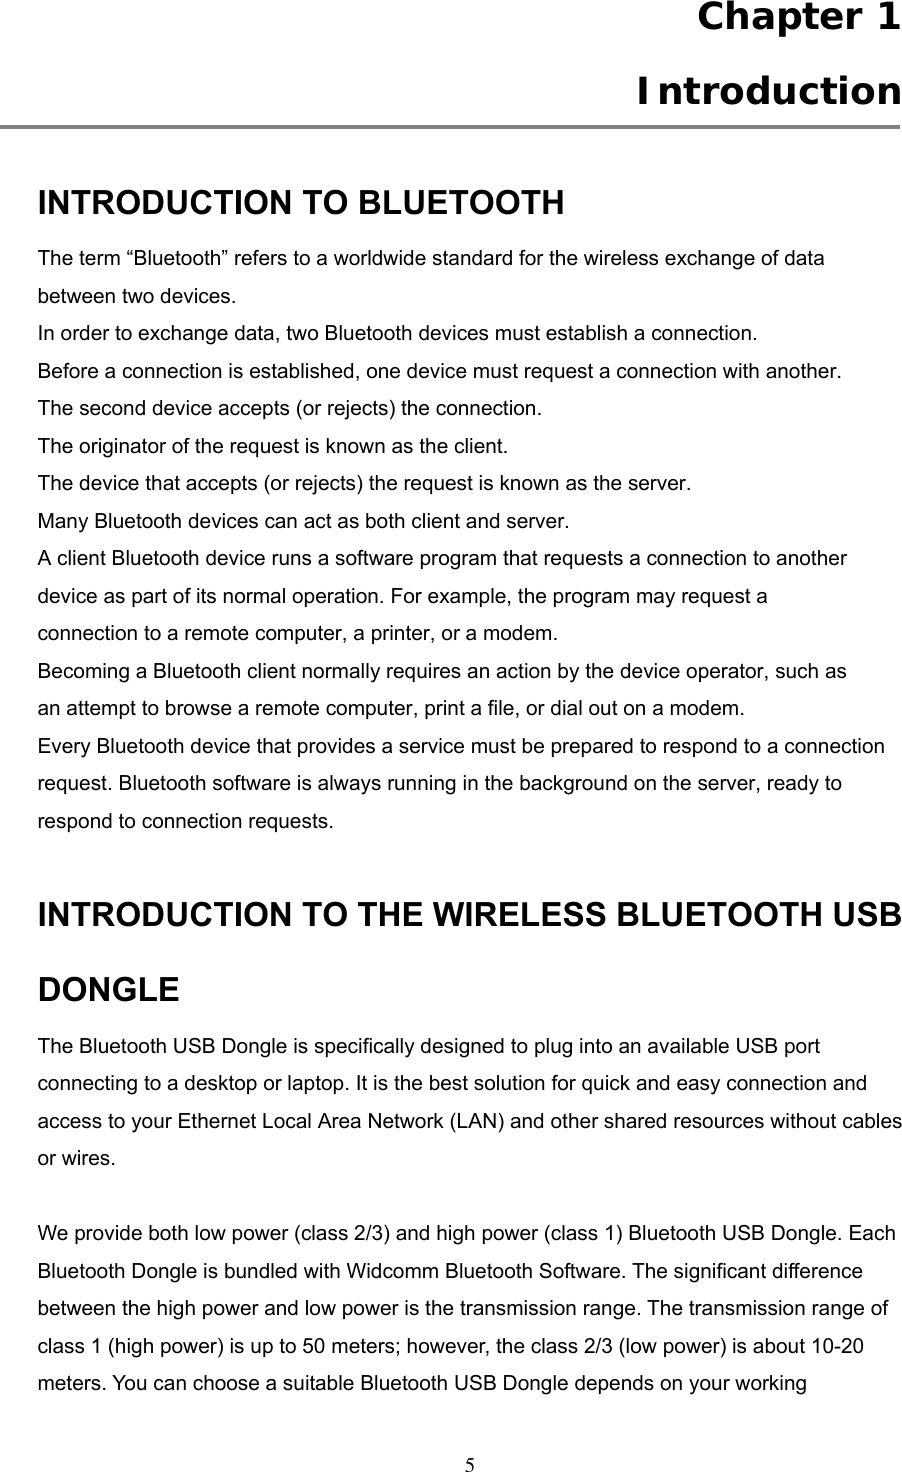  Chapter 1  Introduction  INTRODUCTION TO BLUETOOTH The term “Bluetooth” refers to a worldwide standard for the wireless exchange of data between two devices. In order to exchange data, two Bluetooth devices must establish a connection. Before a connection is established, one device must request a connection with another. The second device accepts (or rejects) the connection. The originator of the request is known as the client. The device that accepts (or rejects) the request is known as the server. Many Bluetooth devices can act as both client and server. A client Bluetooth device runs a software program that requests a connection to another device as part of its normal operation. For example, the program may request a connection to a remote computer, a printer, or a modem. Becoming a Bluetooth client normally requires an action by the device operator, such as an attempt to browse a remote computer, print a file, or dial out on a modem. Every Bluetooth device that provides a service must be prepared to respond to a connection request. Bluetooth software is always running in the background on the server, ready to respond to connection requests.  INTRODUCTION TO THE WIRELESS BLUETOOTH USB DONGLE The Bluetooth USB Dongle is specifically designed to plug into an available USB port connecting to a desktop or laptop. It is the best solution for quick and easy connection and access to your Ethernet Local Area Network (LAN) and other shared resources without cables or wires.    We provide both low power (class 2/3) and high power (class 1) Bluetooth USB Dongle. Each Bluetooth Dongle is bundled with Widcomm Bluetooth Software. The significant difference between the high power and low power is the transmission range. The transmission range of class 1 (high power) is up to 50 meters; however, the class 2/3 (low power) is about 10-20 meters. You can choose a suitable Bluetooth USB Dongle depends on your working  5 